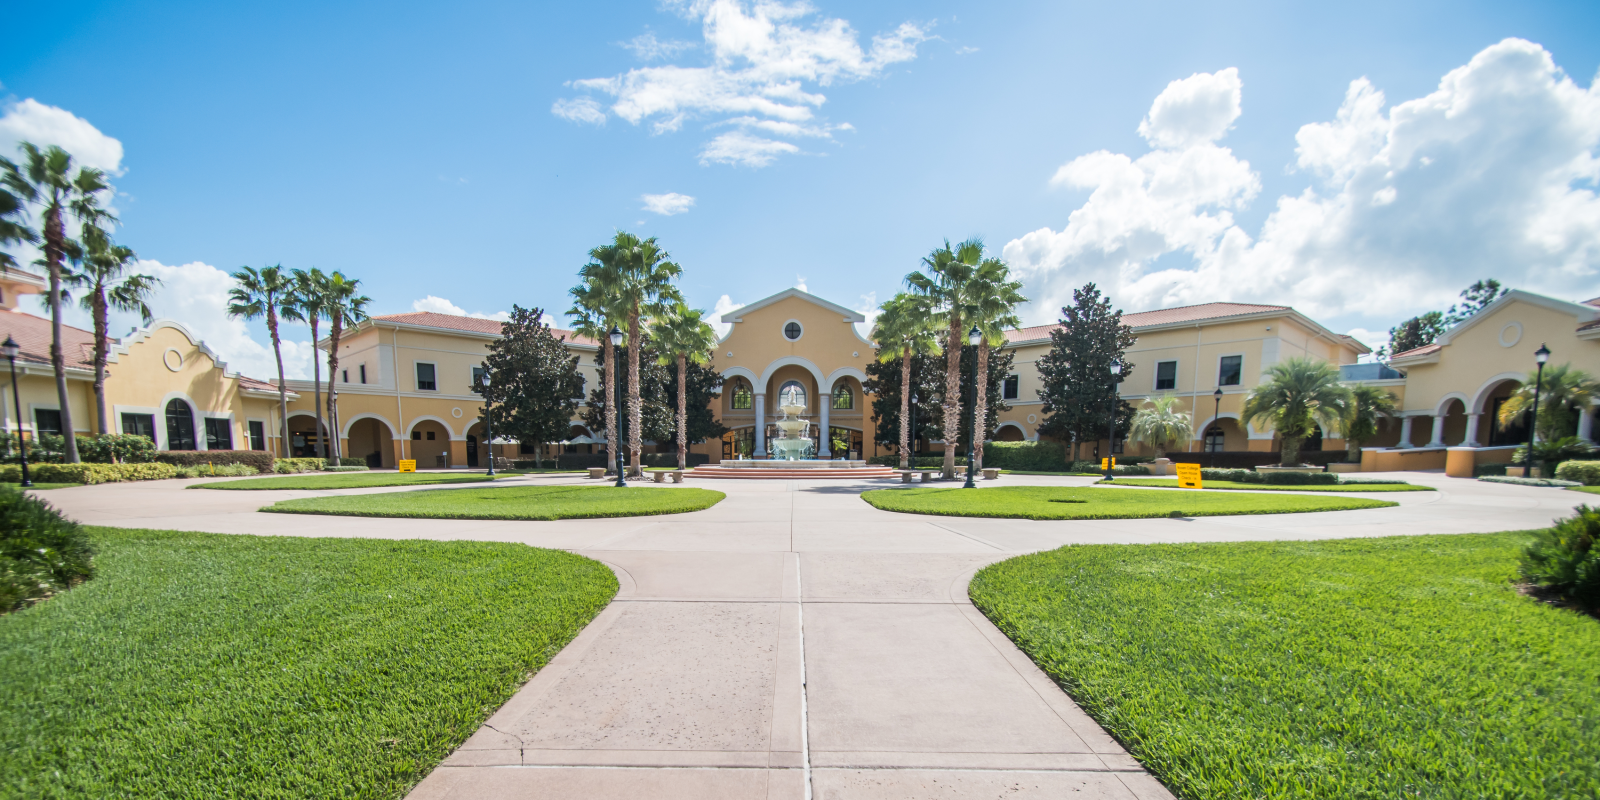 Exterior image of the Rosen College courtyard.